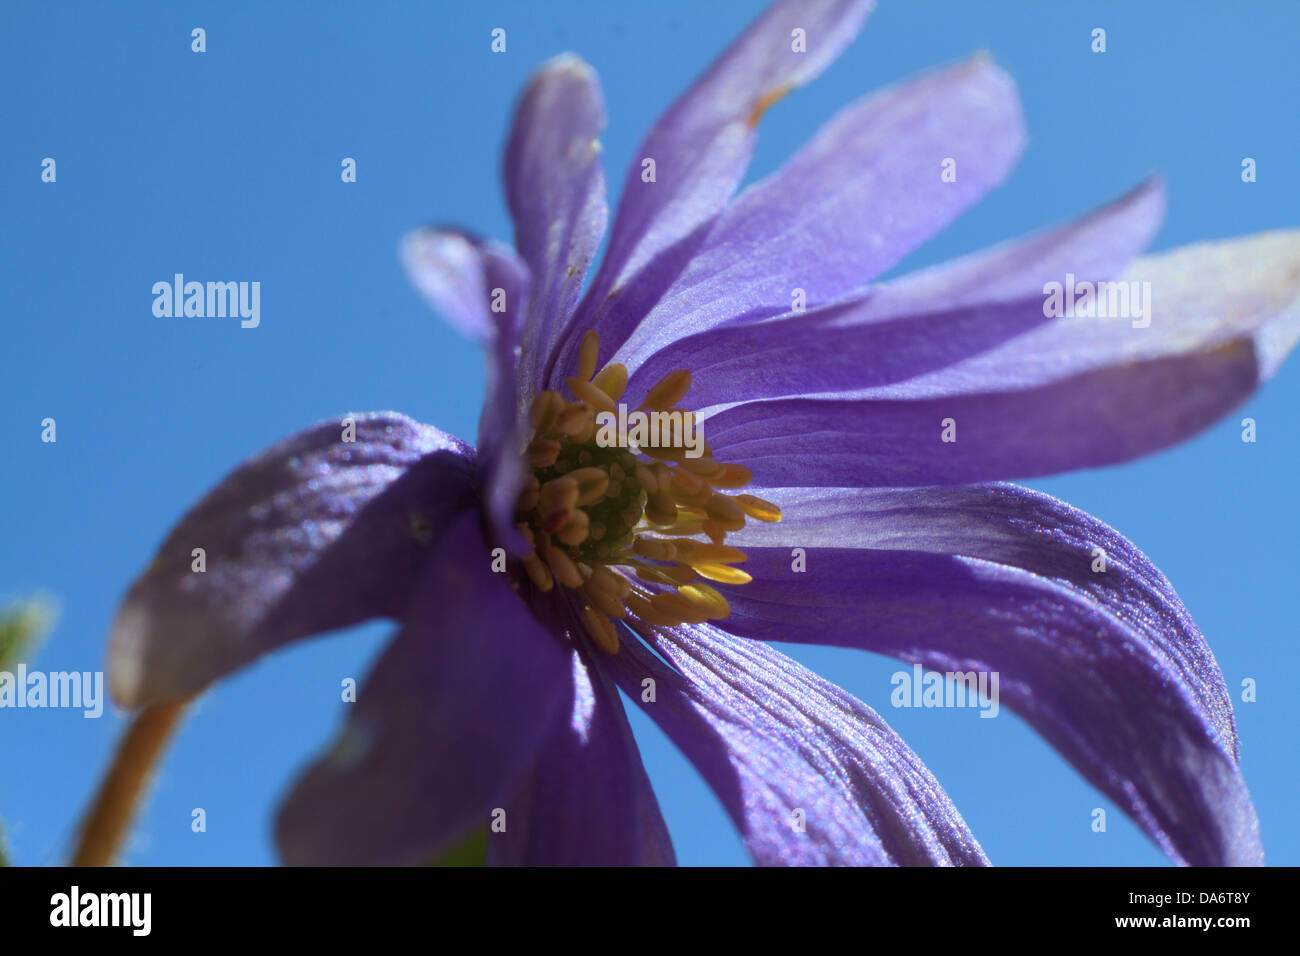 Close-up macro image of the centre of a purple Anemone flower Stock Photo